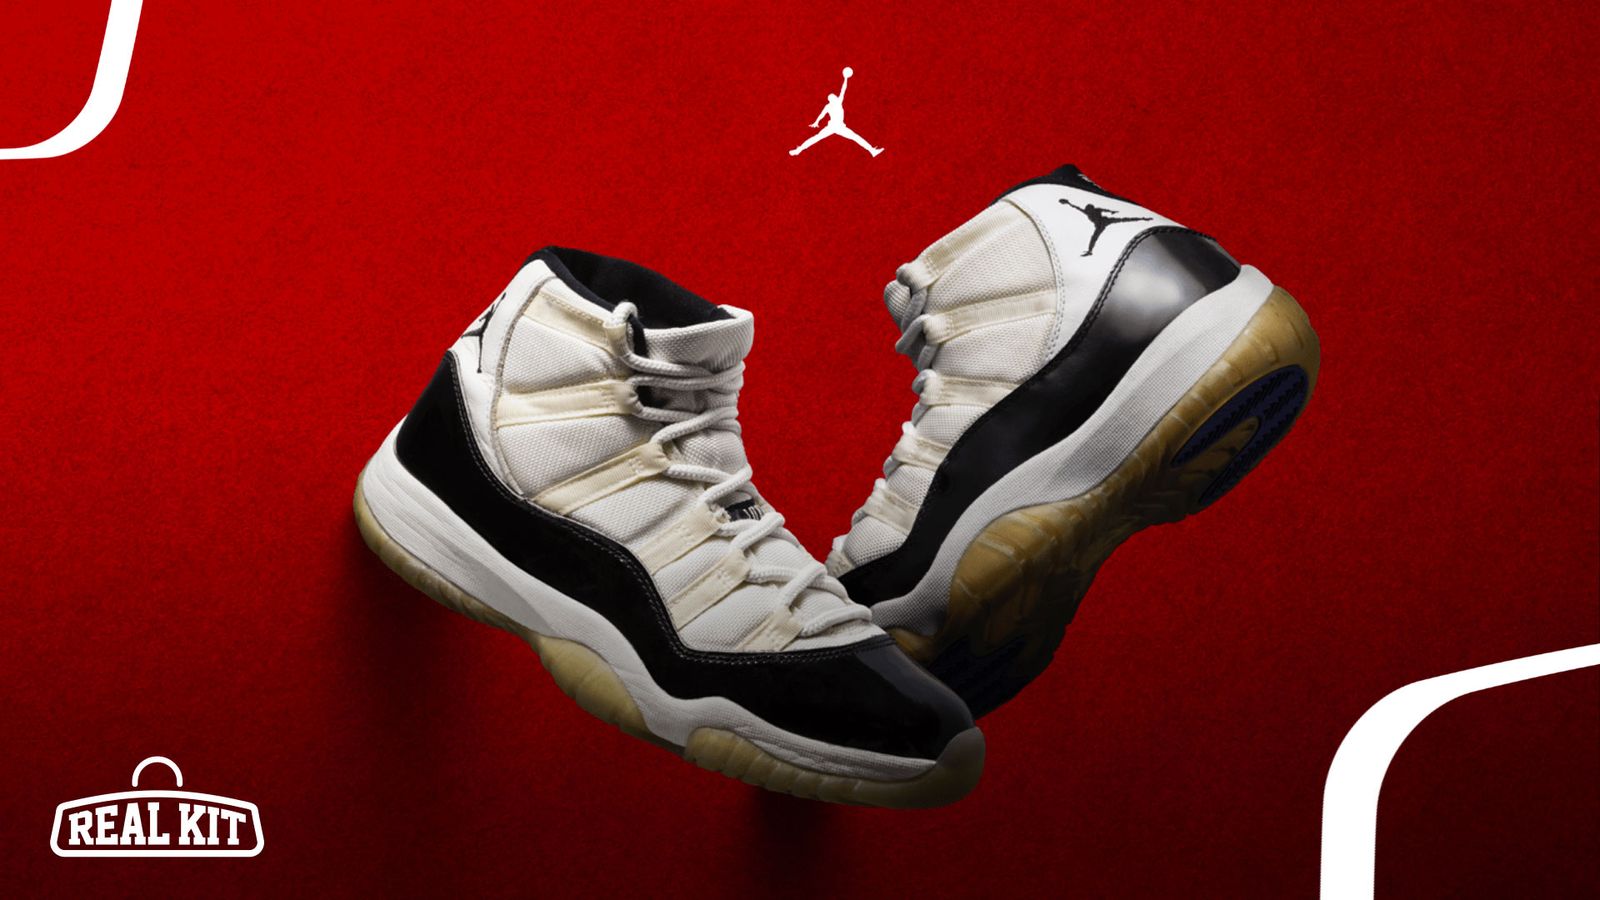 Image of the original white and black Jordan 11s in front of a red background.